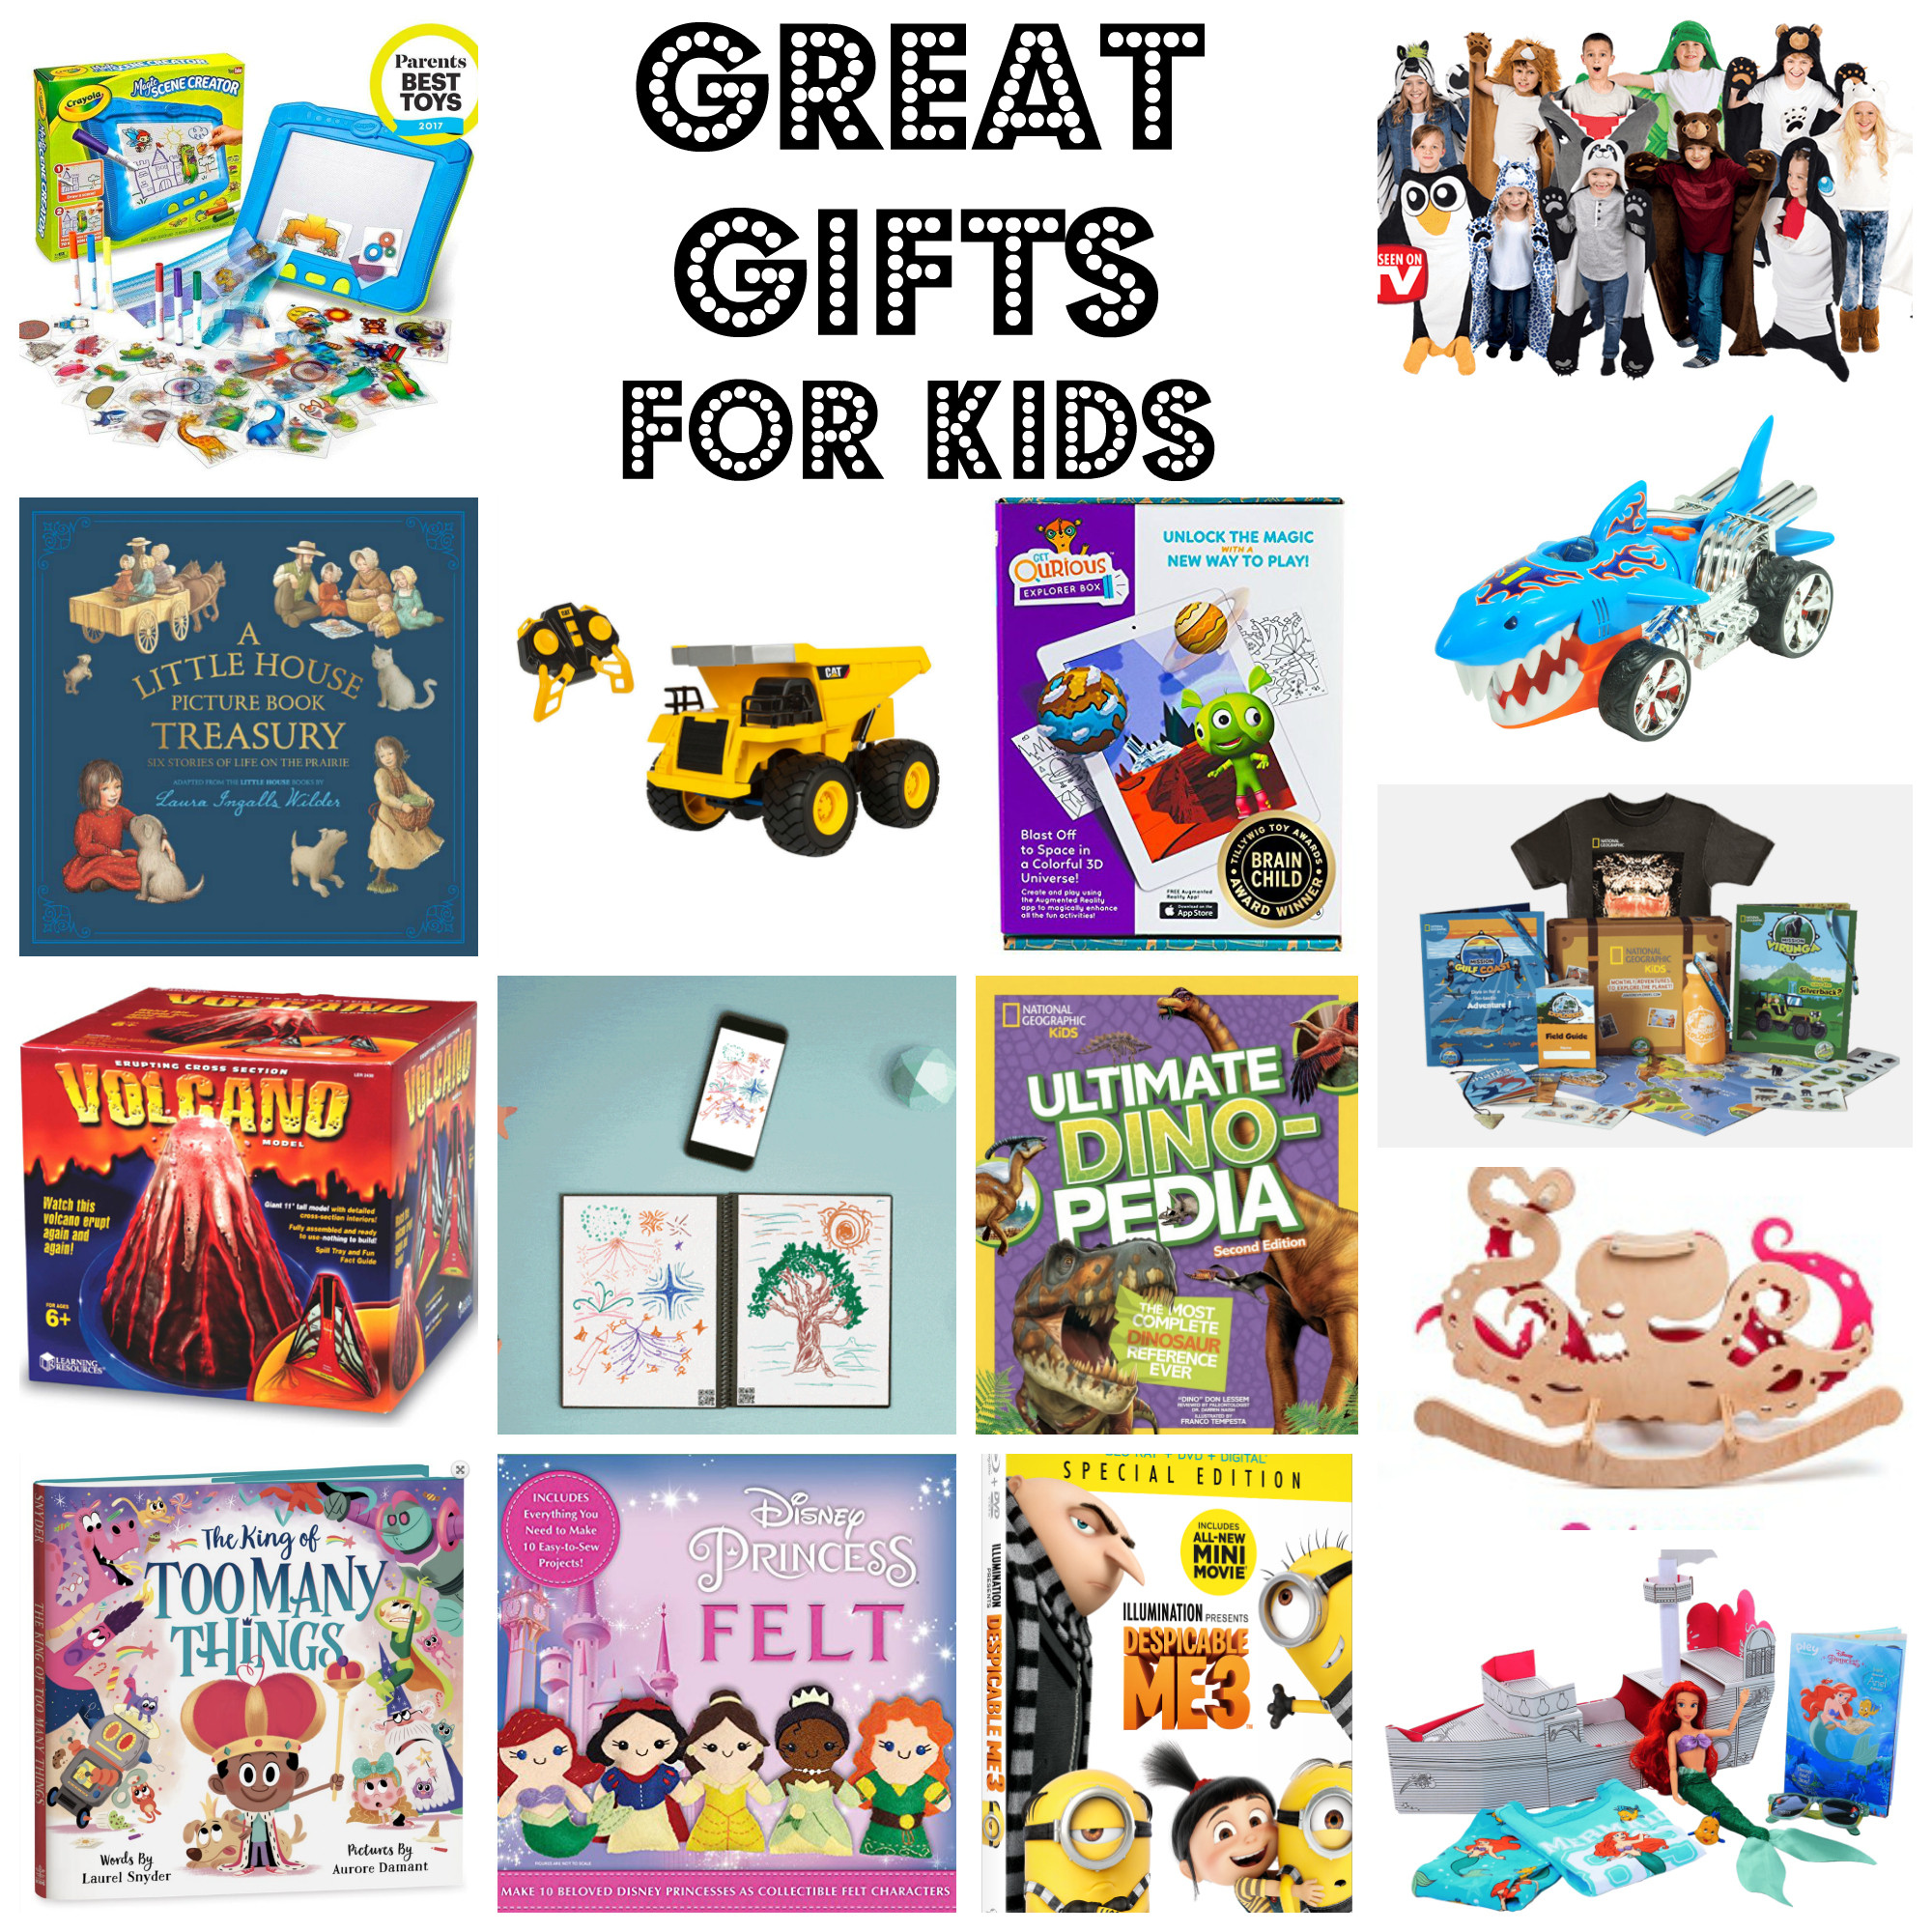 22 Best Fun Gifts for Kids - Home, Family, Style and Art Ideas